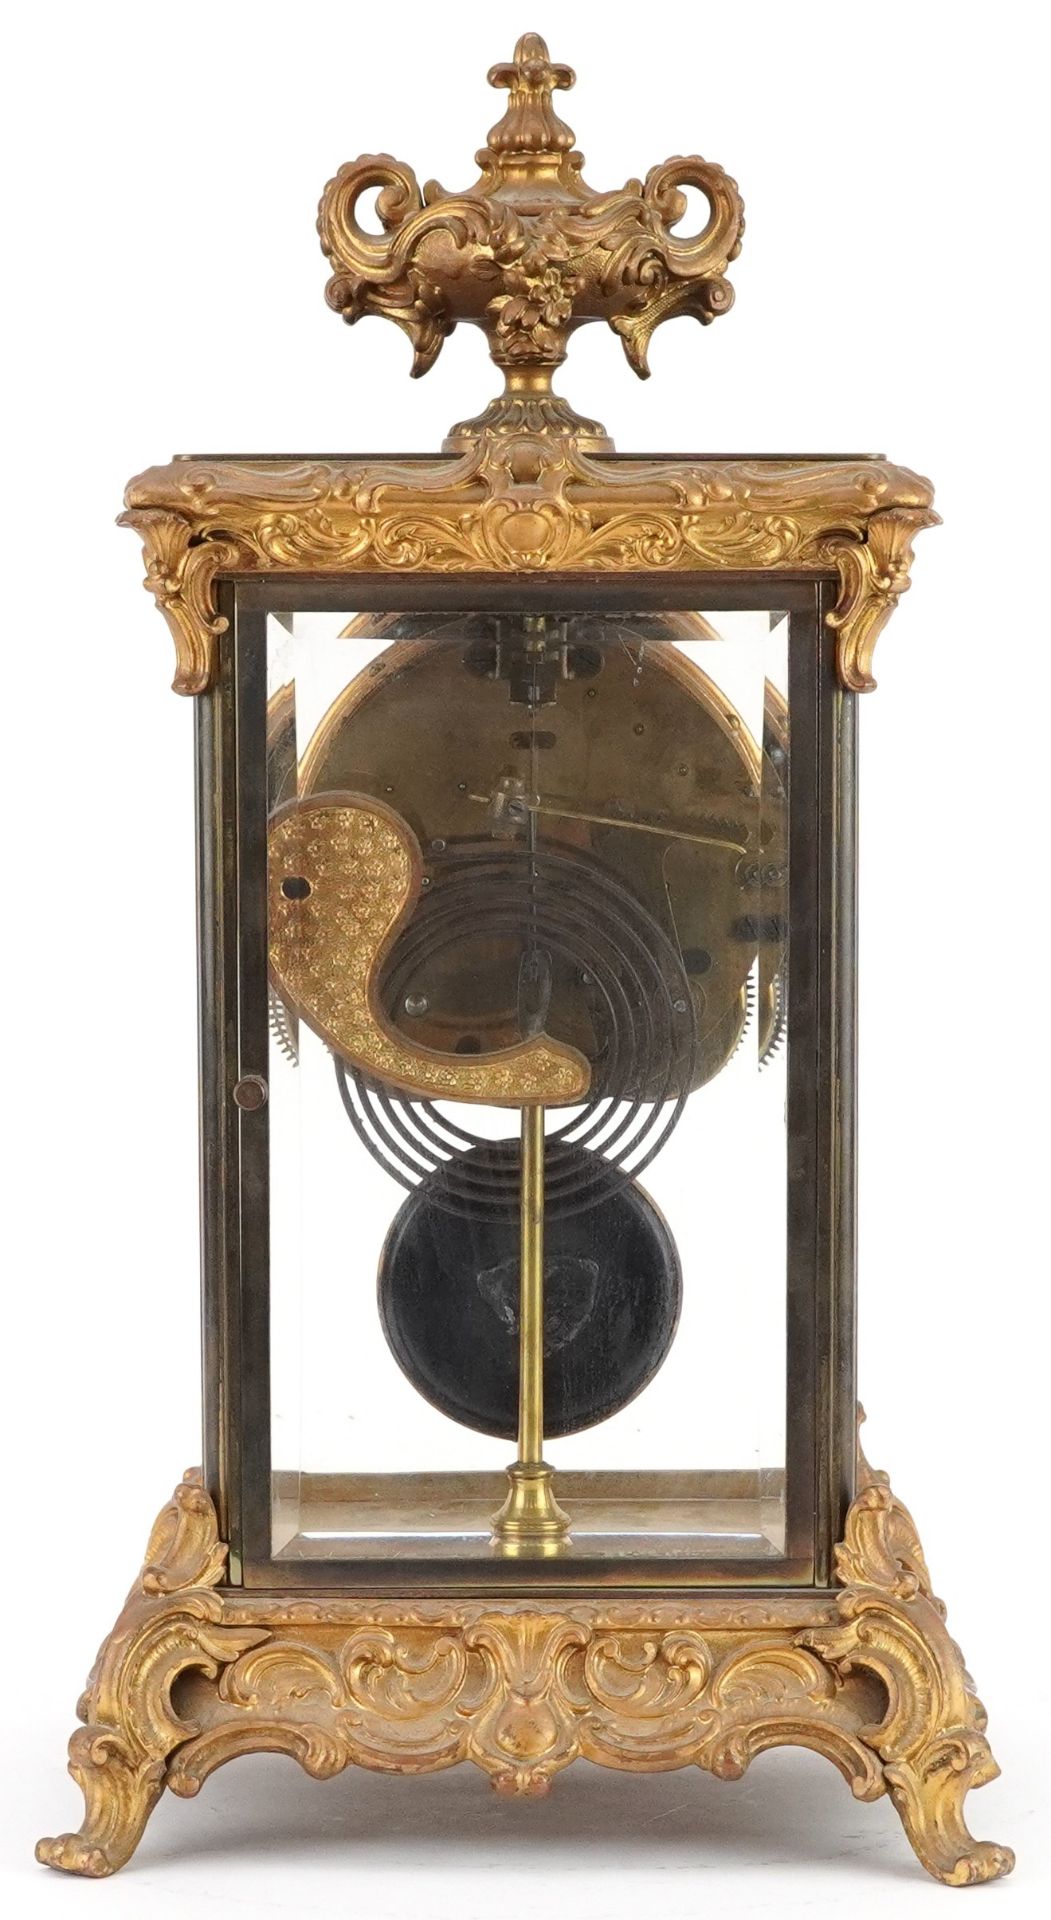 19th century ormolu four glass mantle clock striking on a gong with urn finial and circular - Image 5 of 8